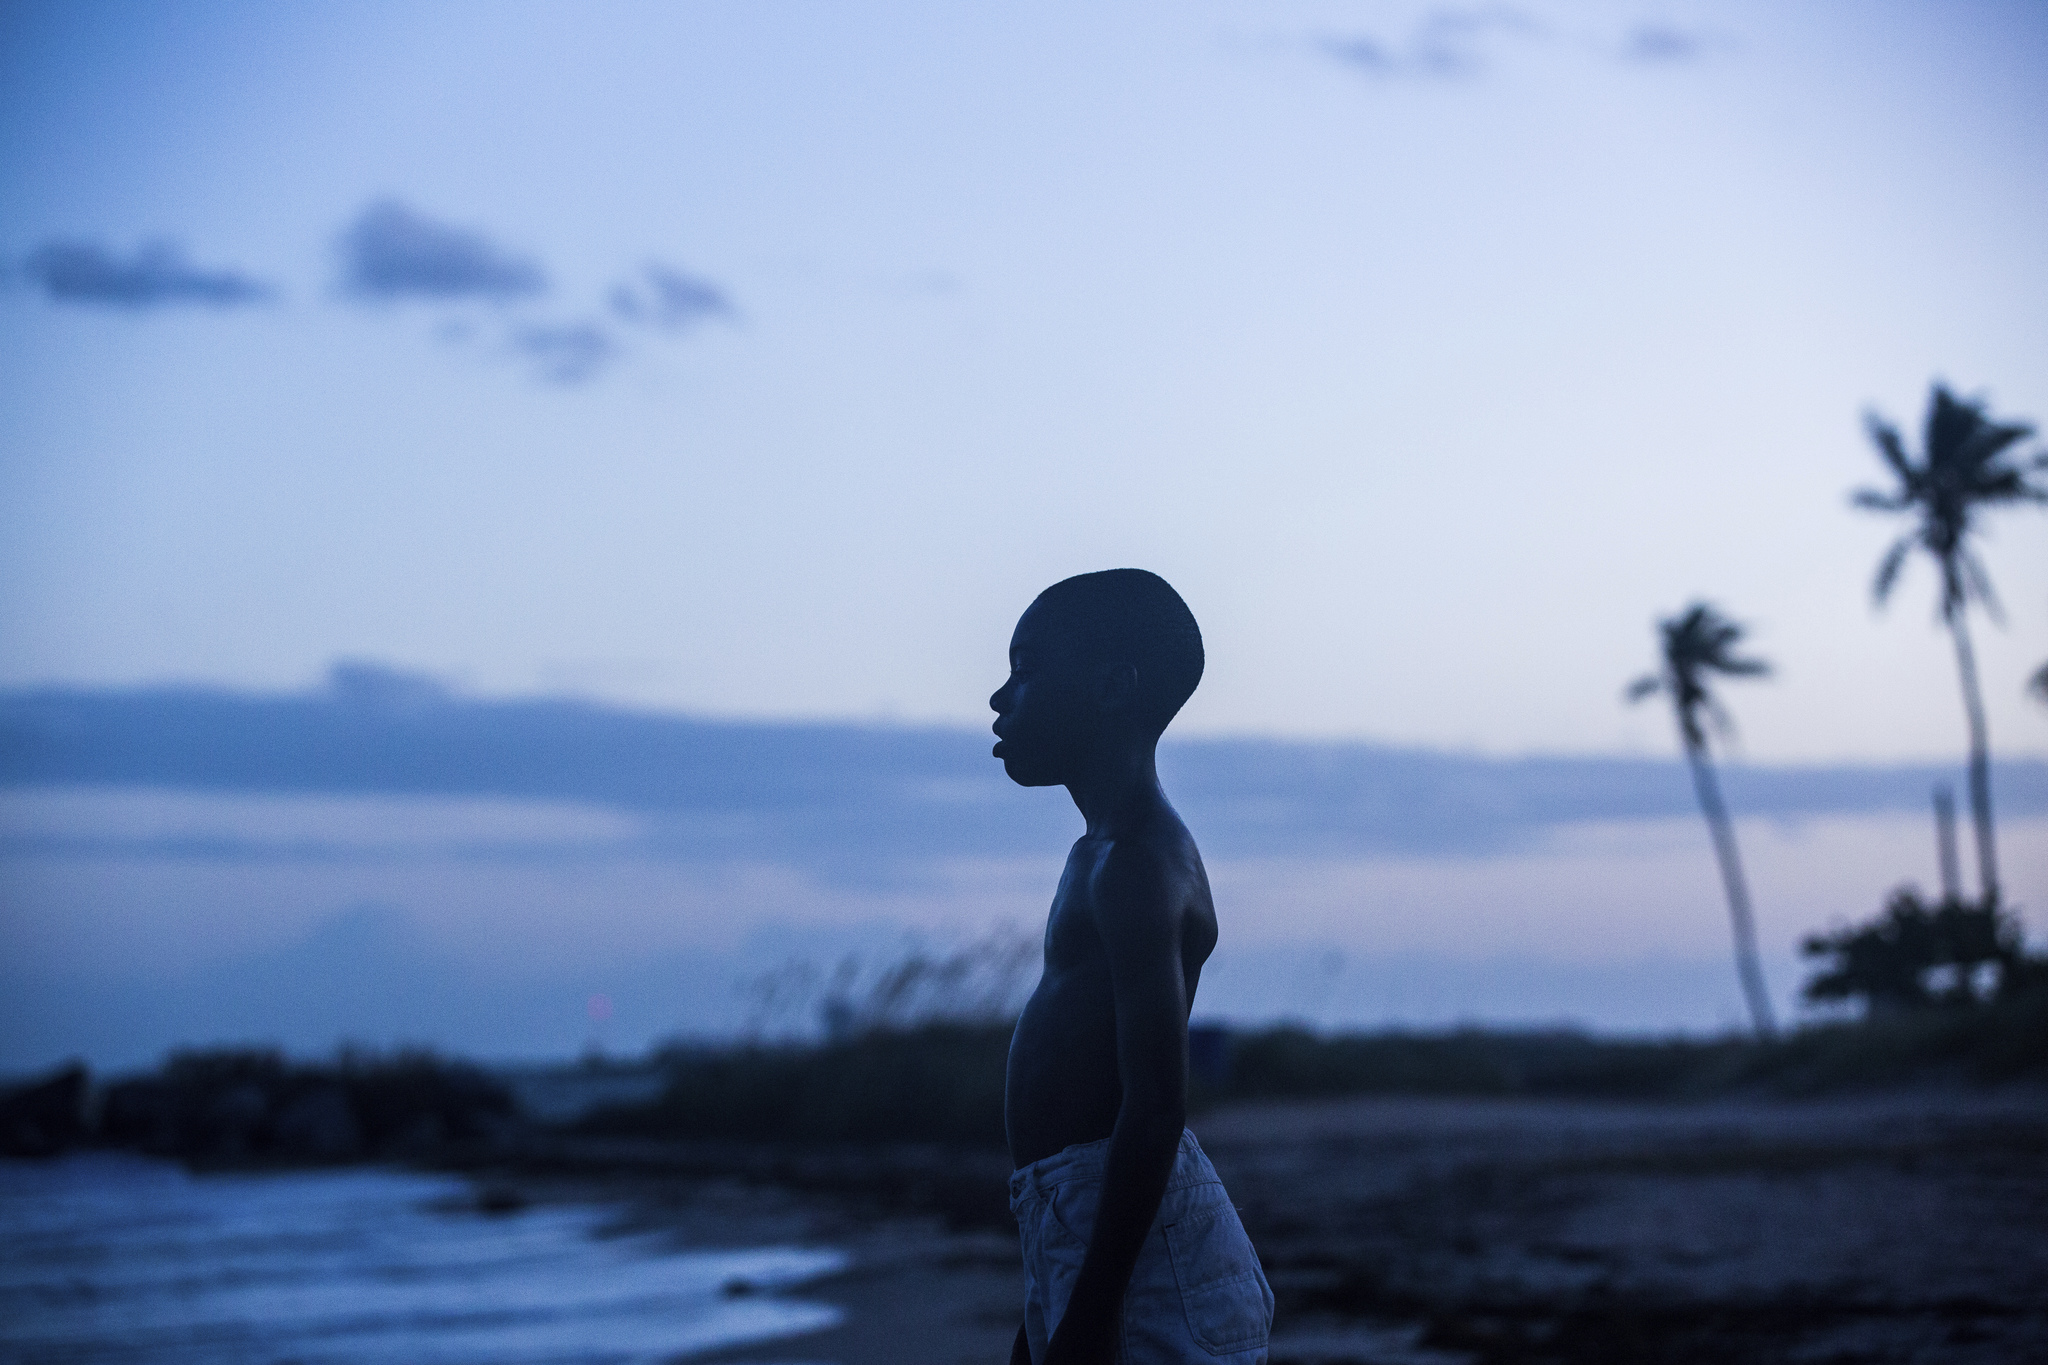 This image released by A24 Films shows Alex Hibbert in a scene from the film, “Moonlight.” Nominees for the 89th Academy Awards will be announced on Tuesday, Jan. 24, 2017. (David Bornfriend/A24 via AP)